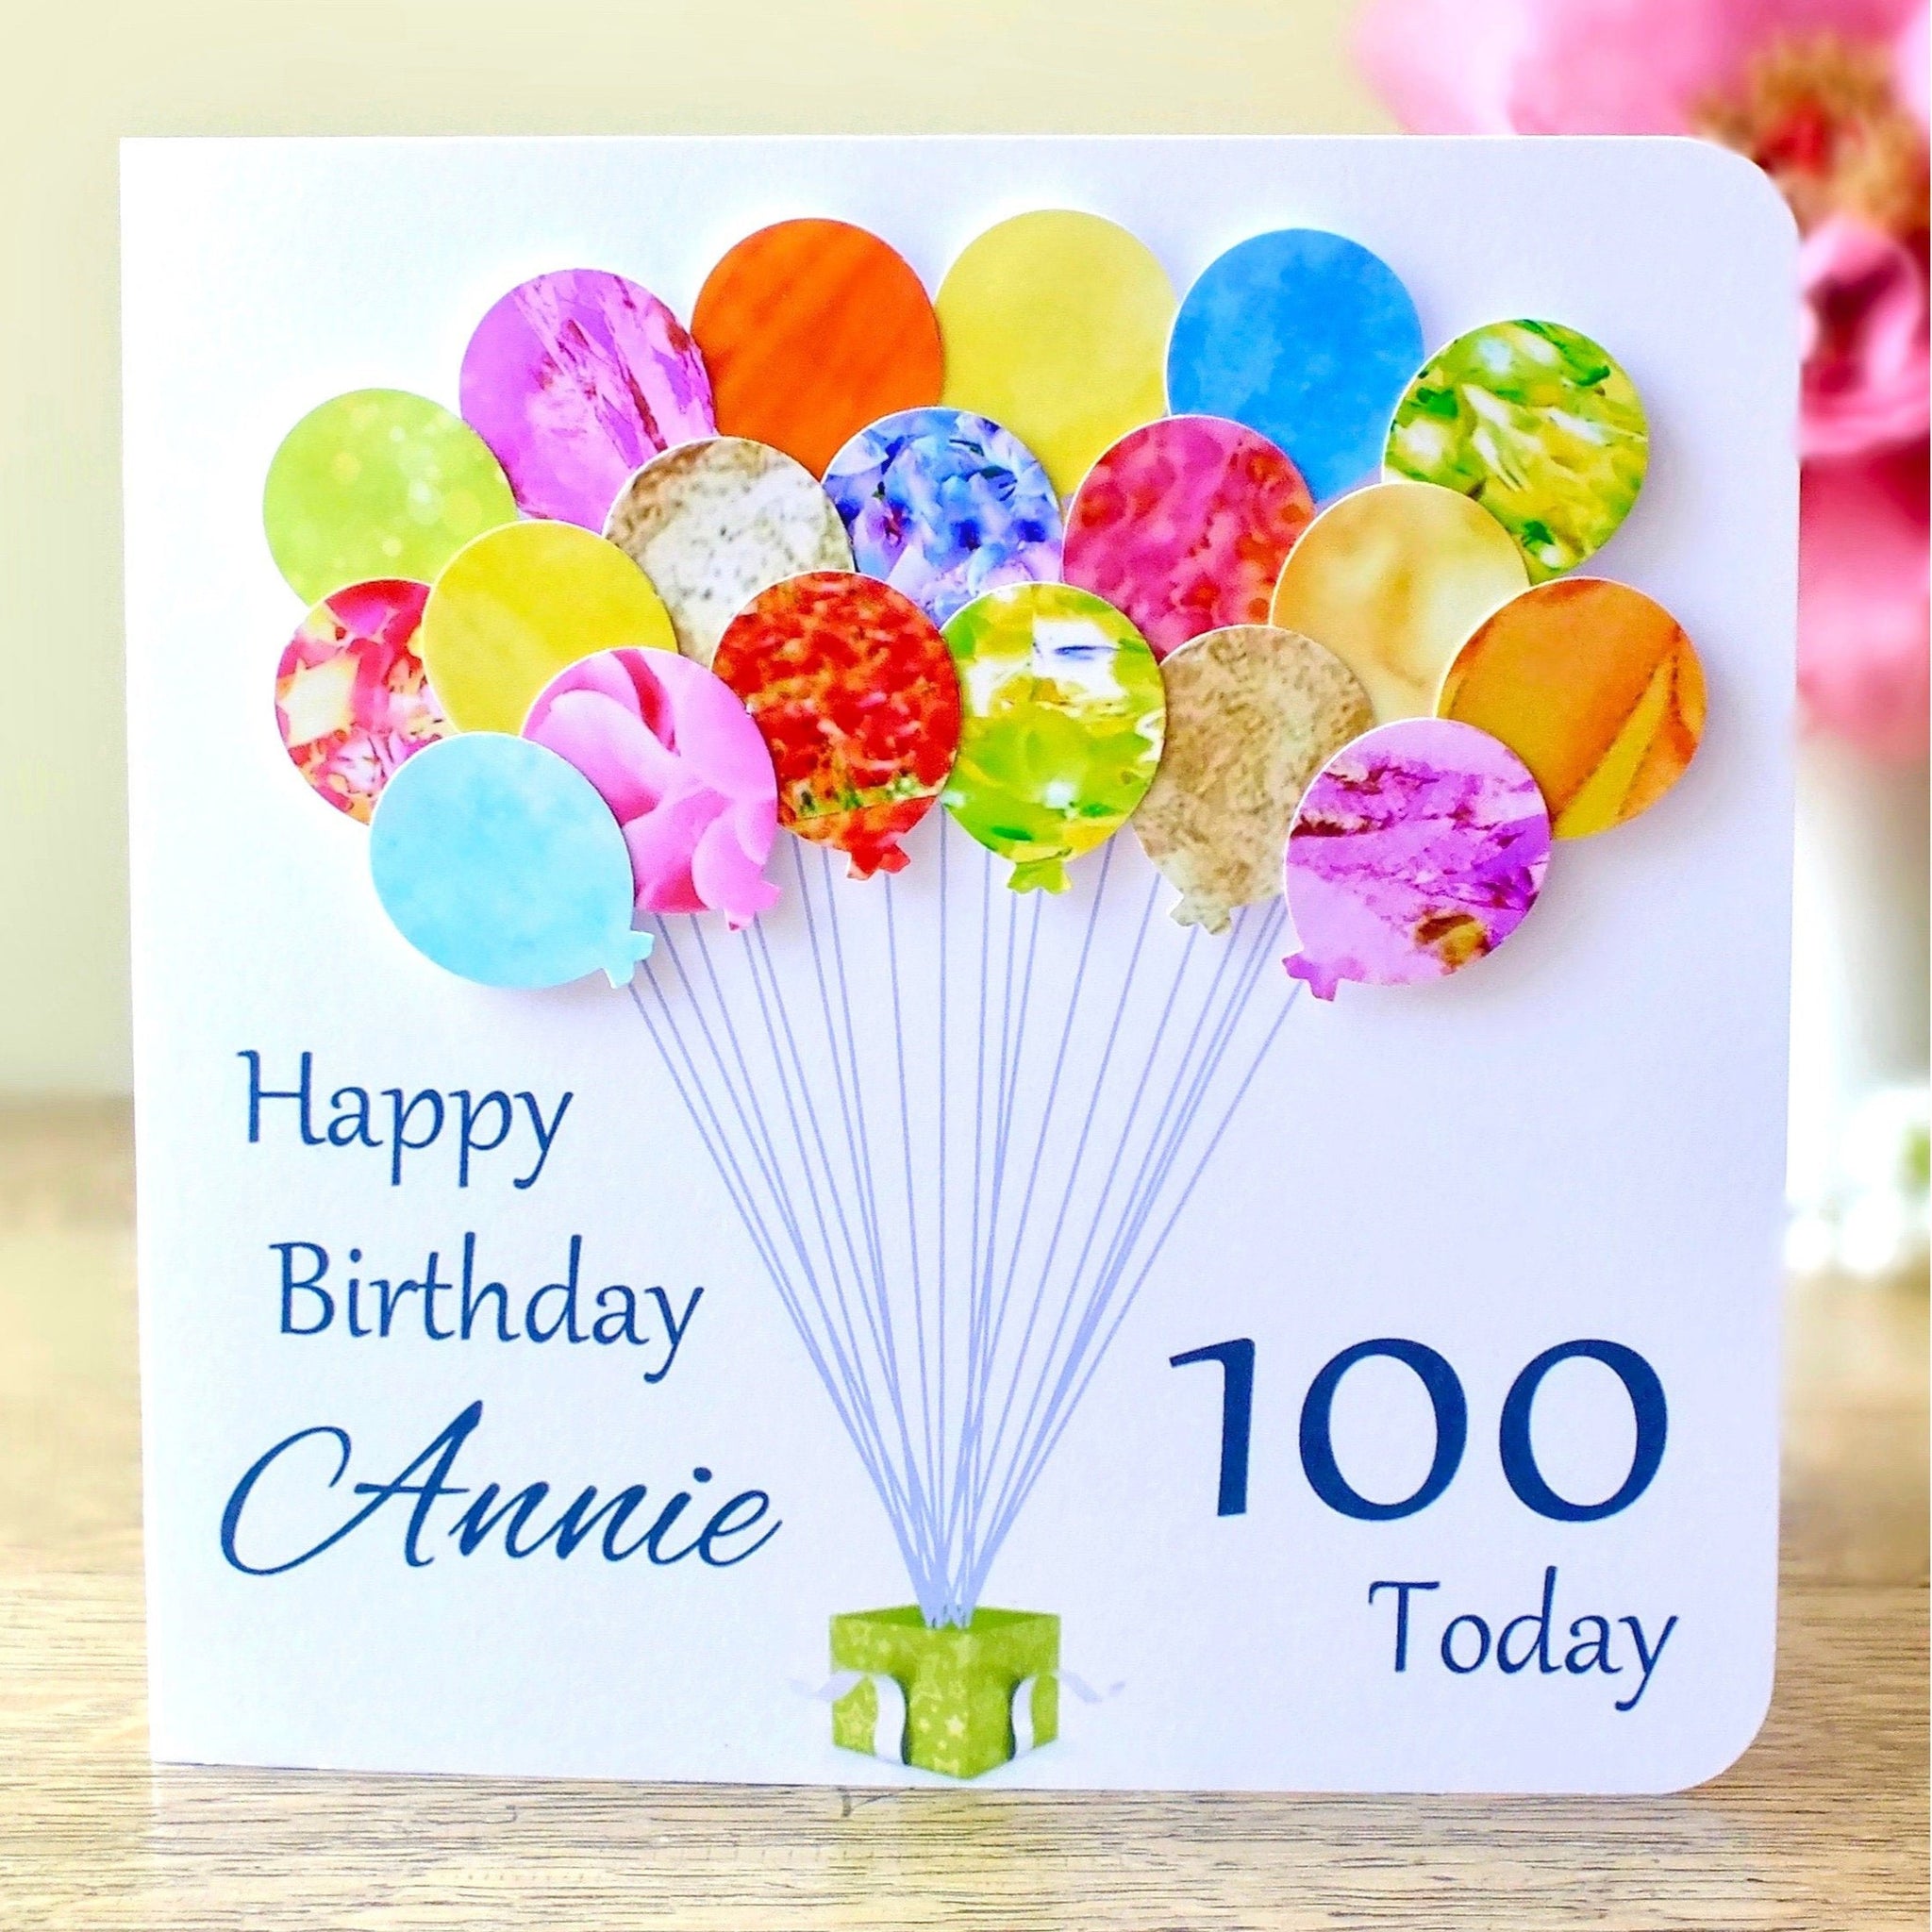 Personalised 100th Birthday Card with Colourful Balloons - Handmade and Unique | New Size Options Available | Bright Heart Design